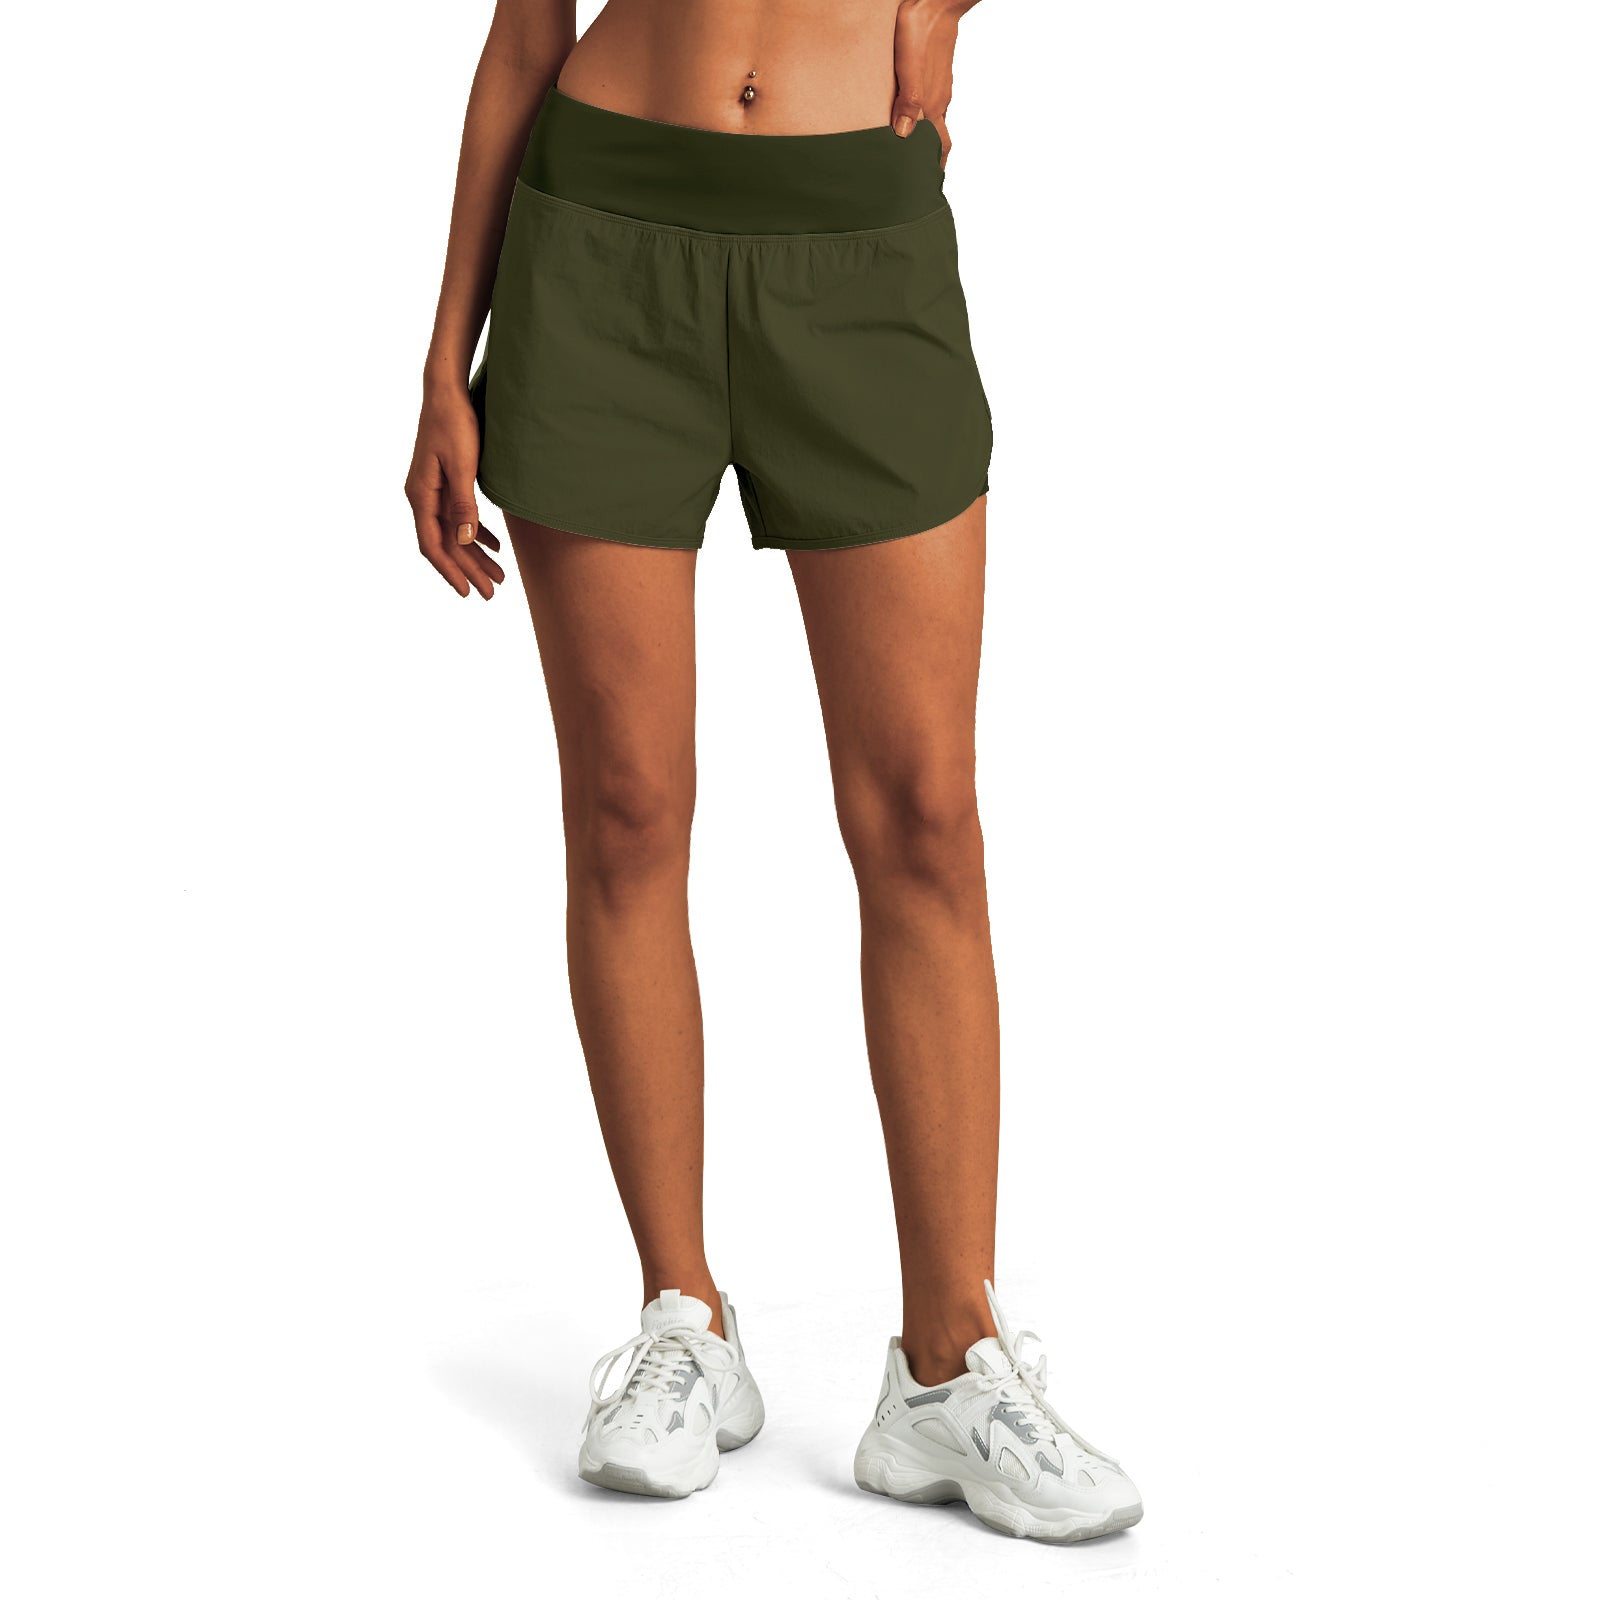 Women's High Waisted Running Shorts with Phone Pockets